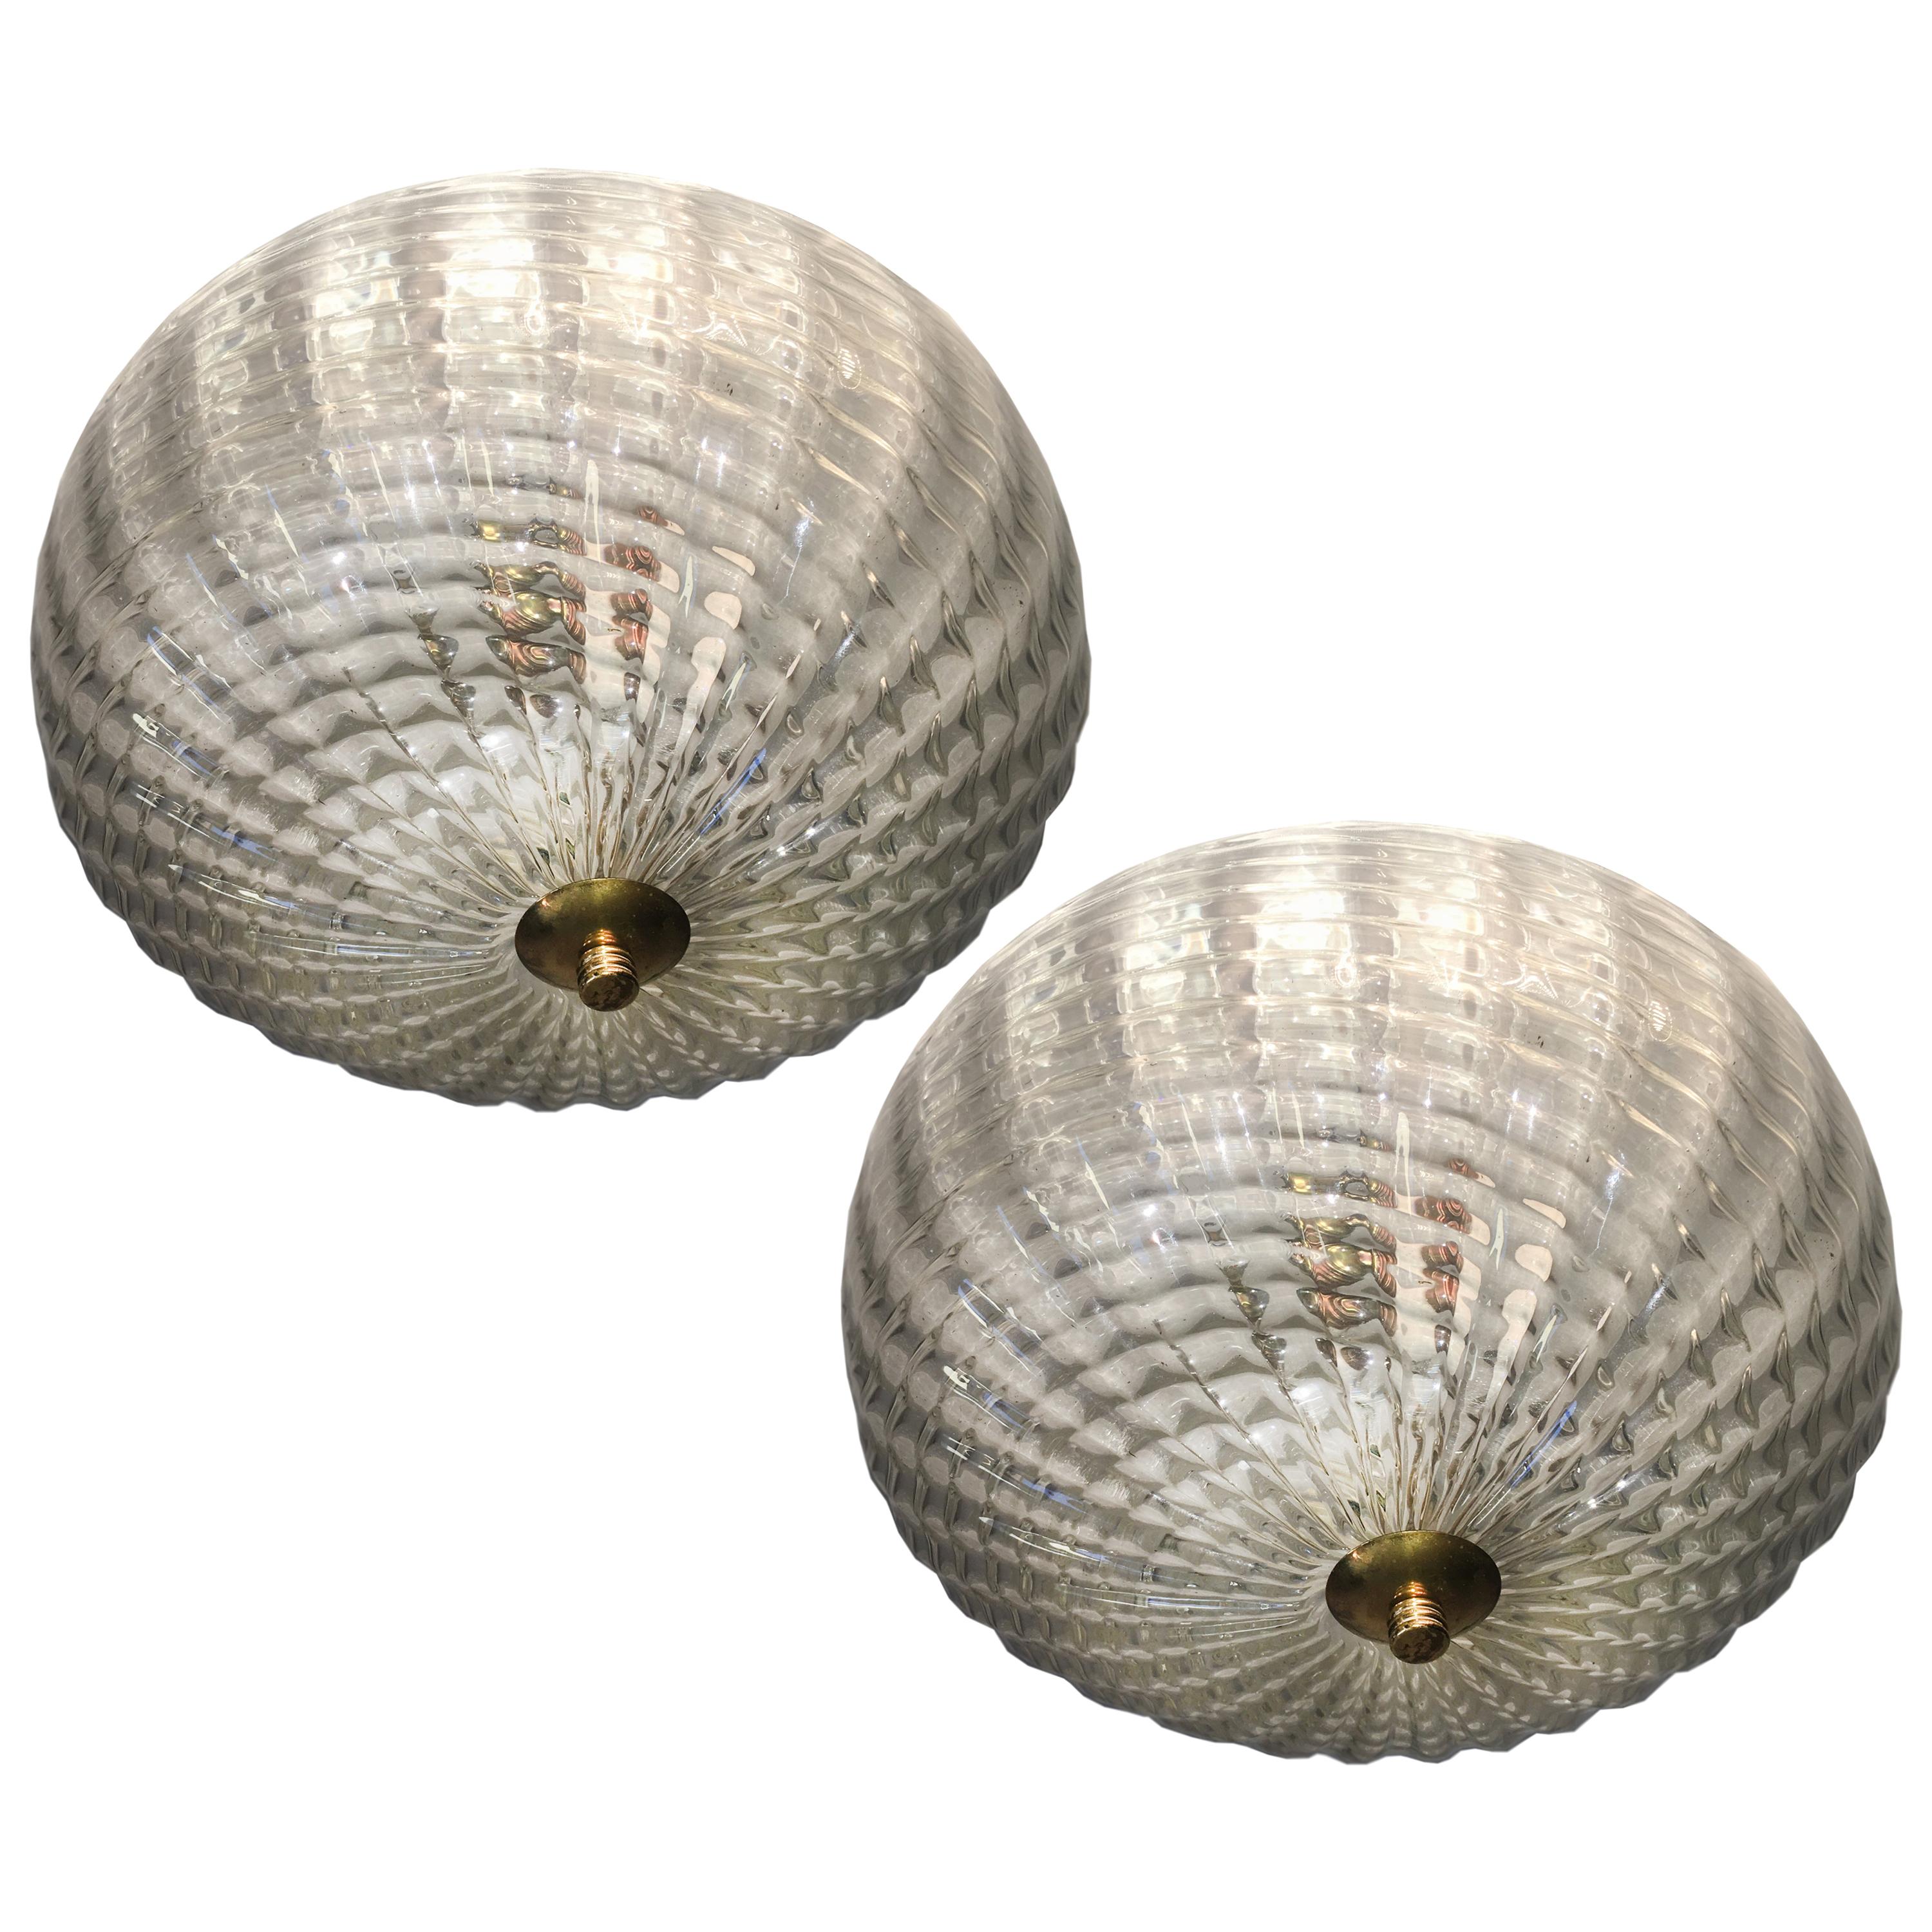 Pair of Ceiling Lights Attributed to Barovier & Toso, 1950s